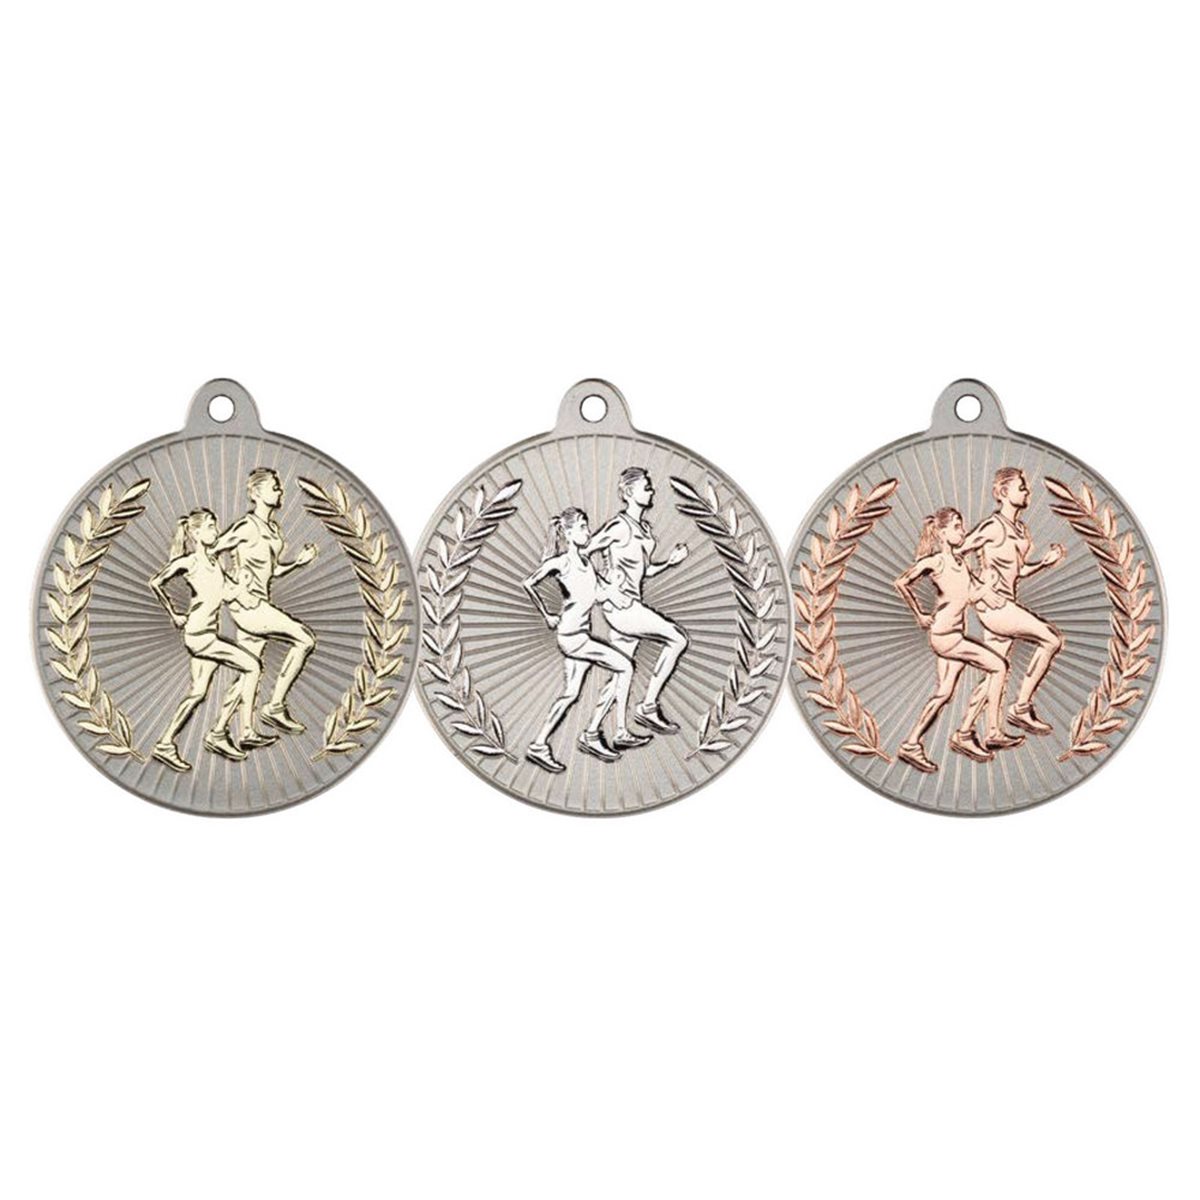 50mm Silver Two Colour Running Medal MV31